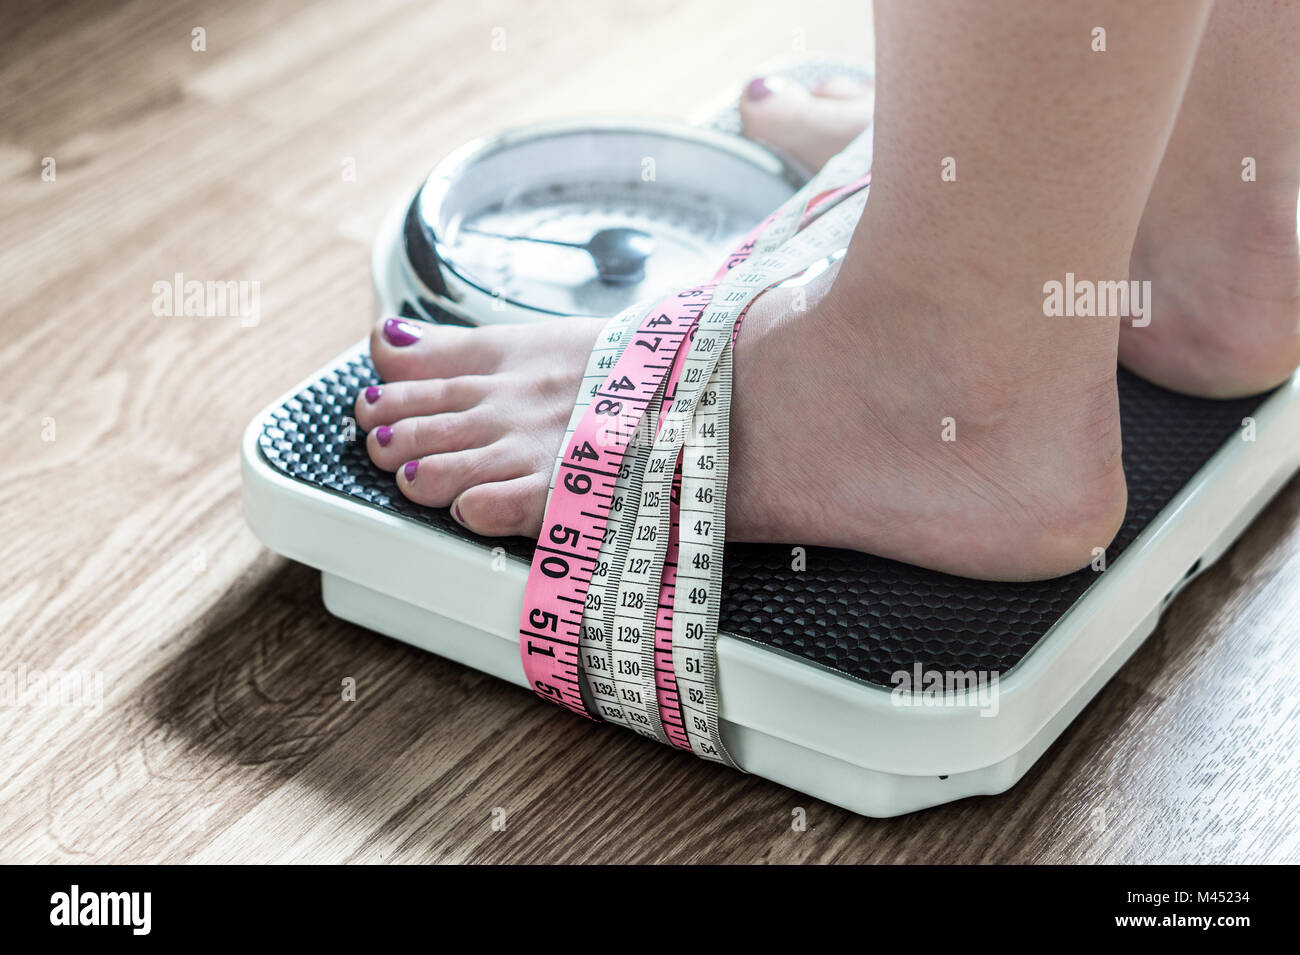 Feet tied up with measuring tape to a weight scale. Addiction and obsession to weight loss. Anorexia and eating disorder concept. Stock Photo